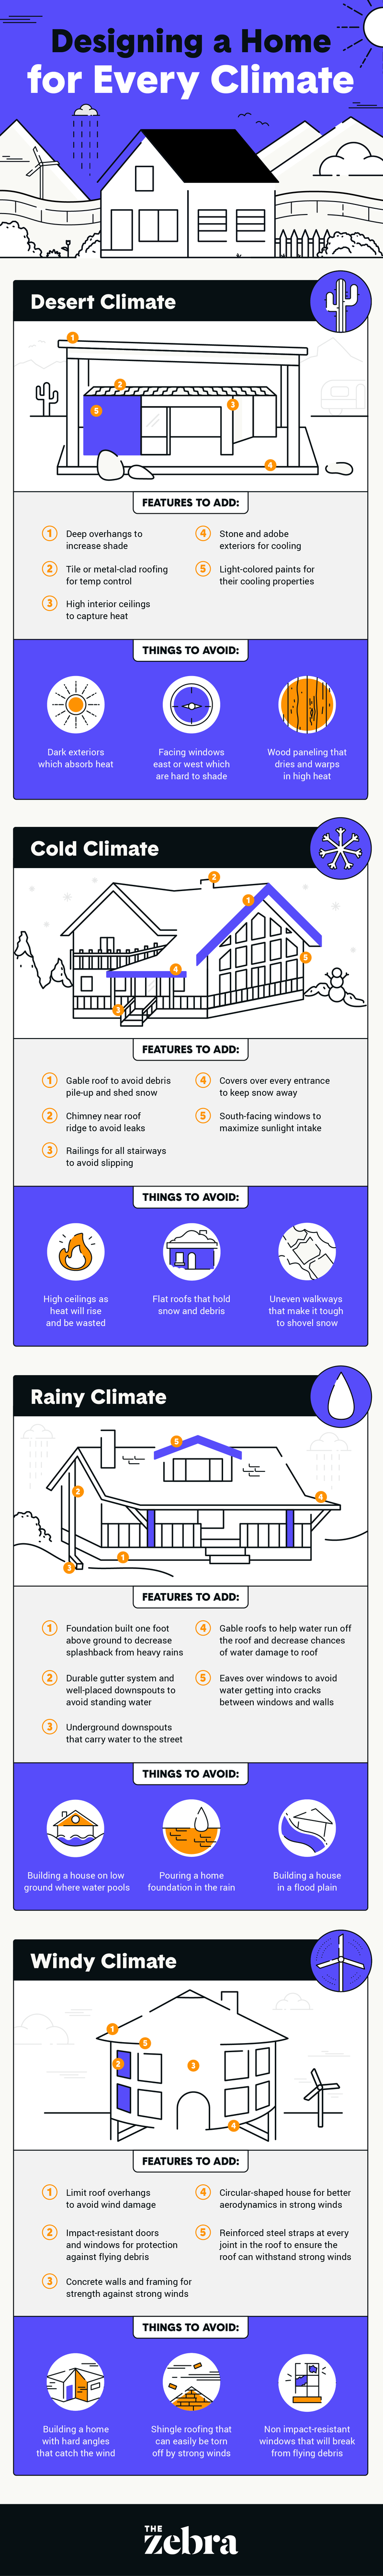 designing a home for every climate infographic 2